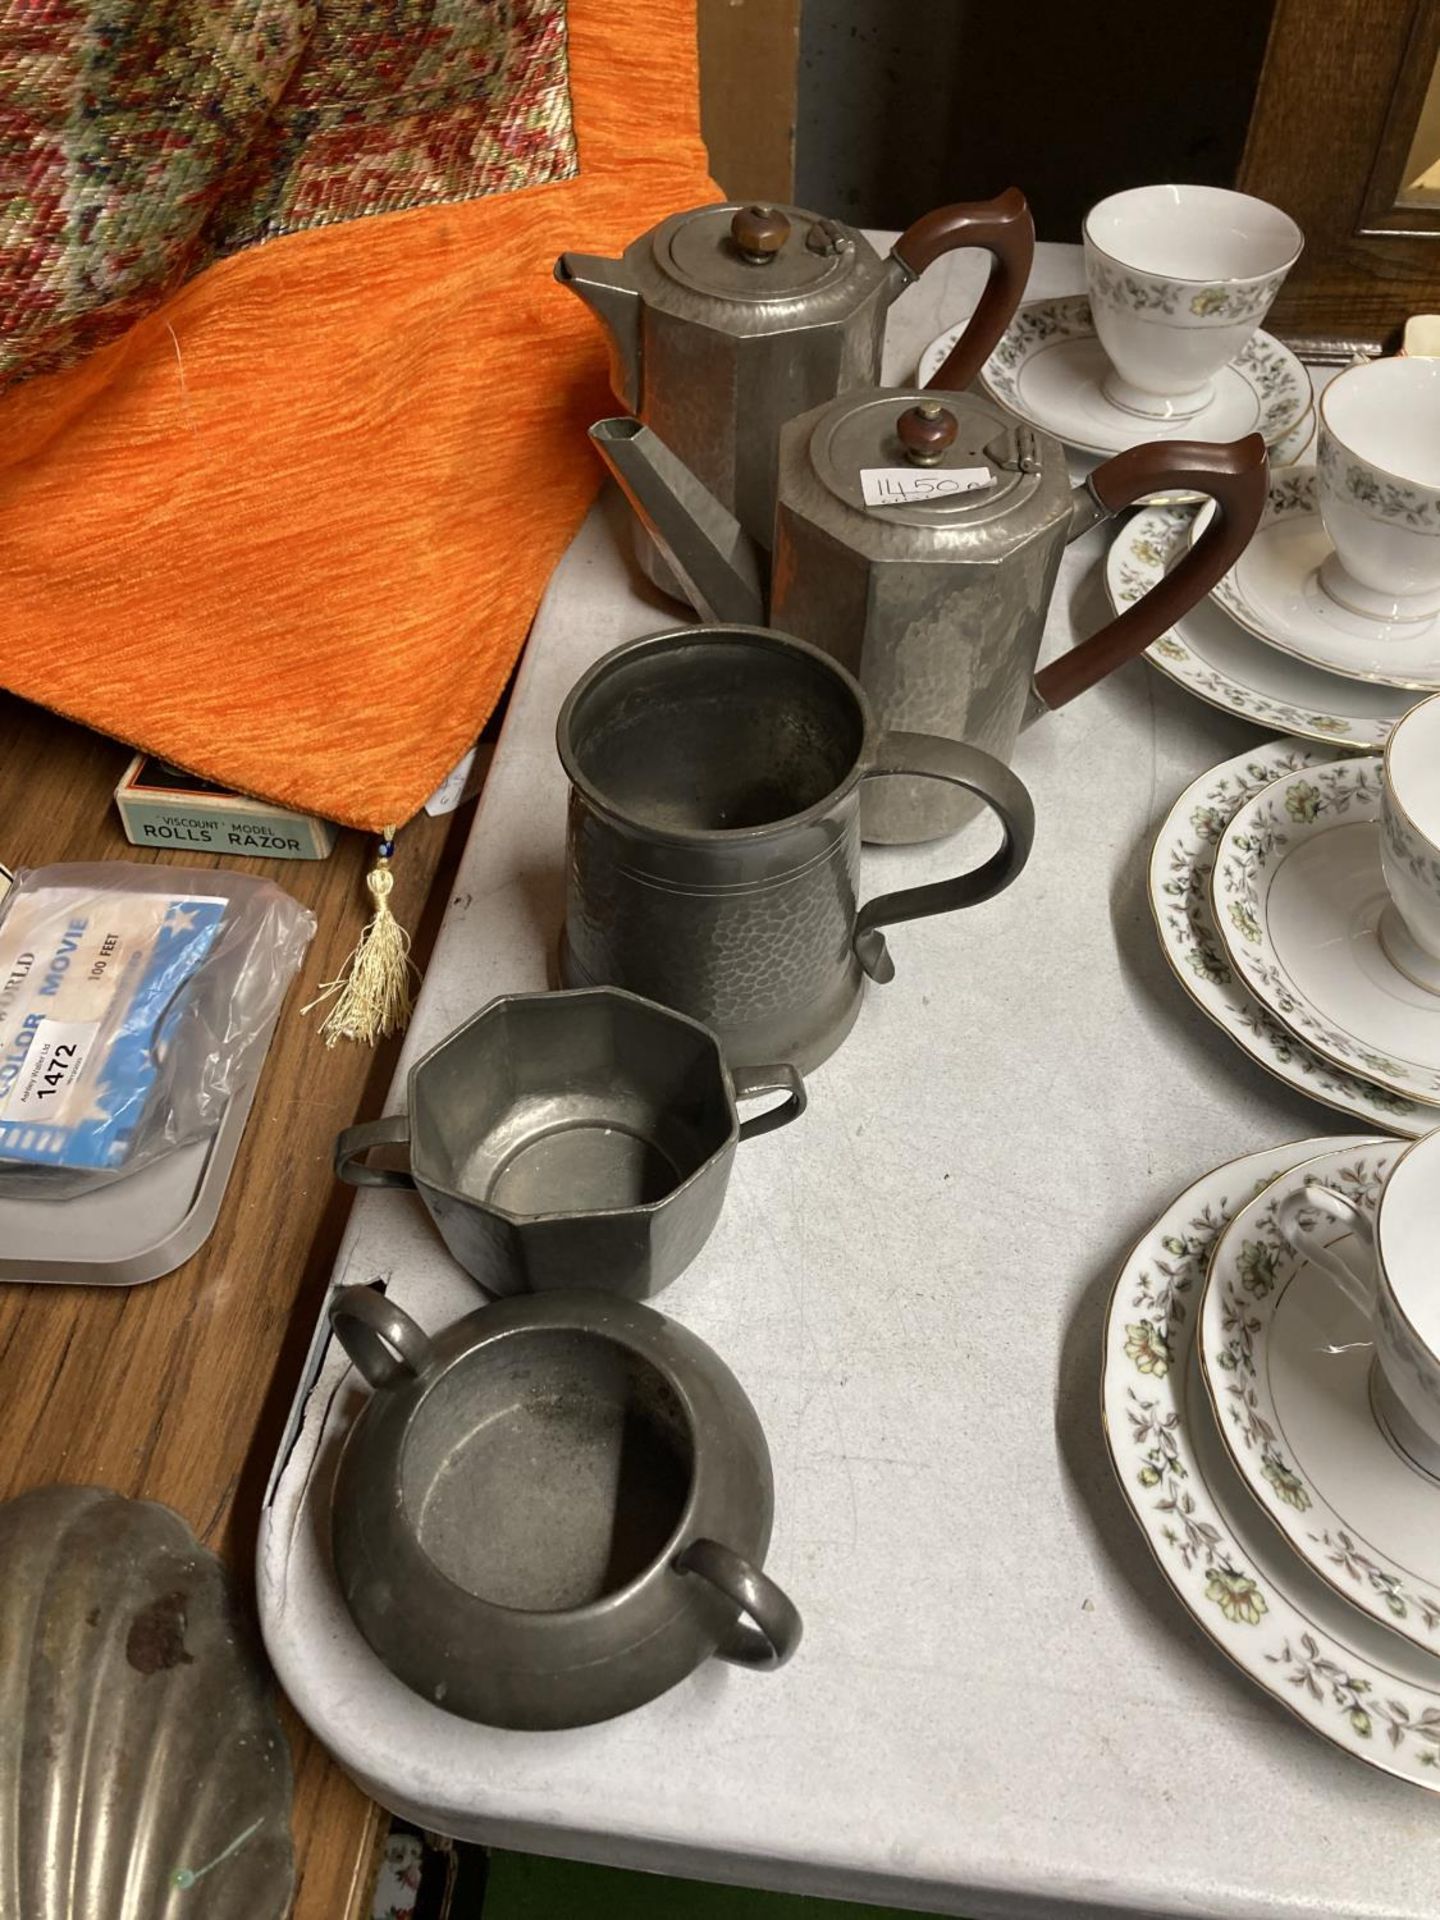 FOUR VINTAGE TUDRIC PEWTER ITEMS - TWO COFFEE POTS AND TWO SUGAR BOWLS, NO. 01650 BY LIBERTY'S OF